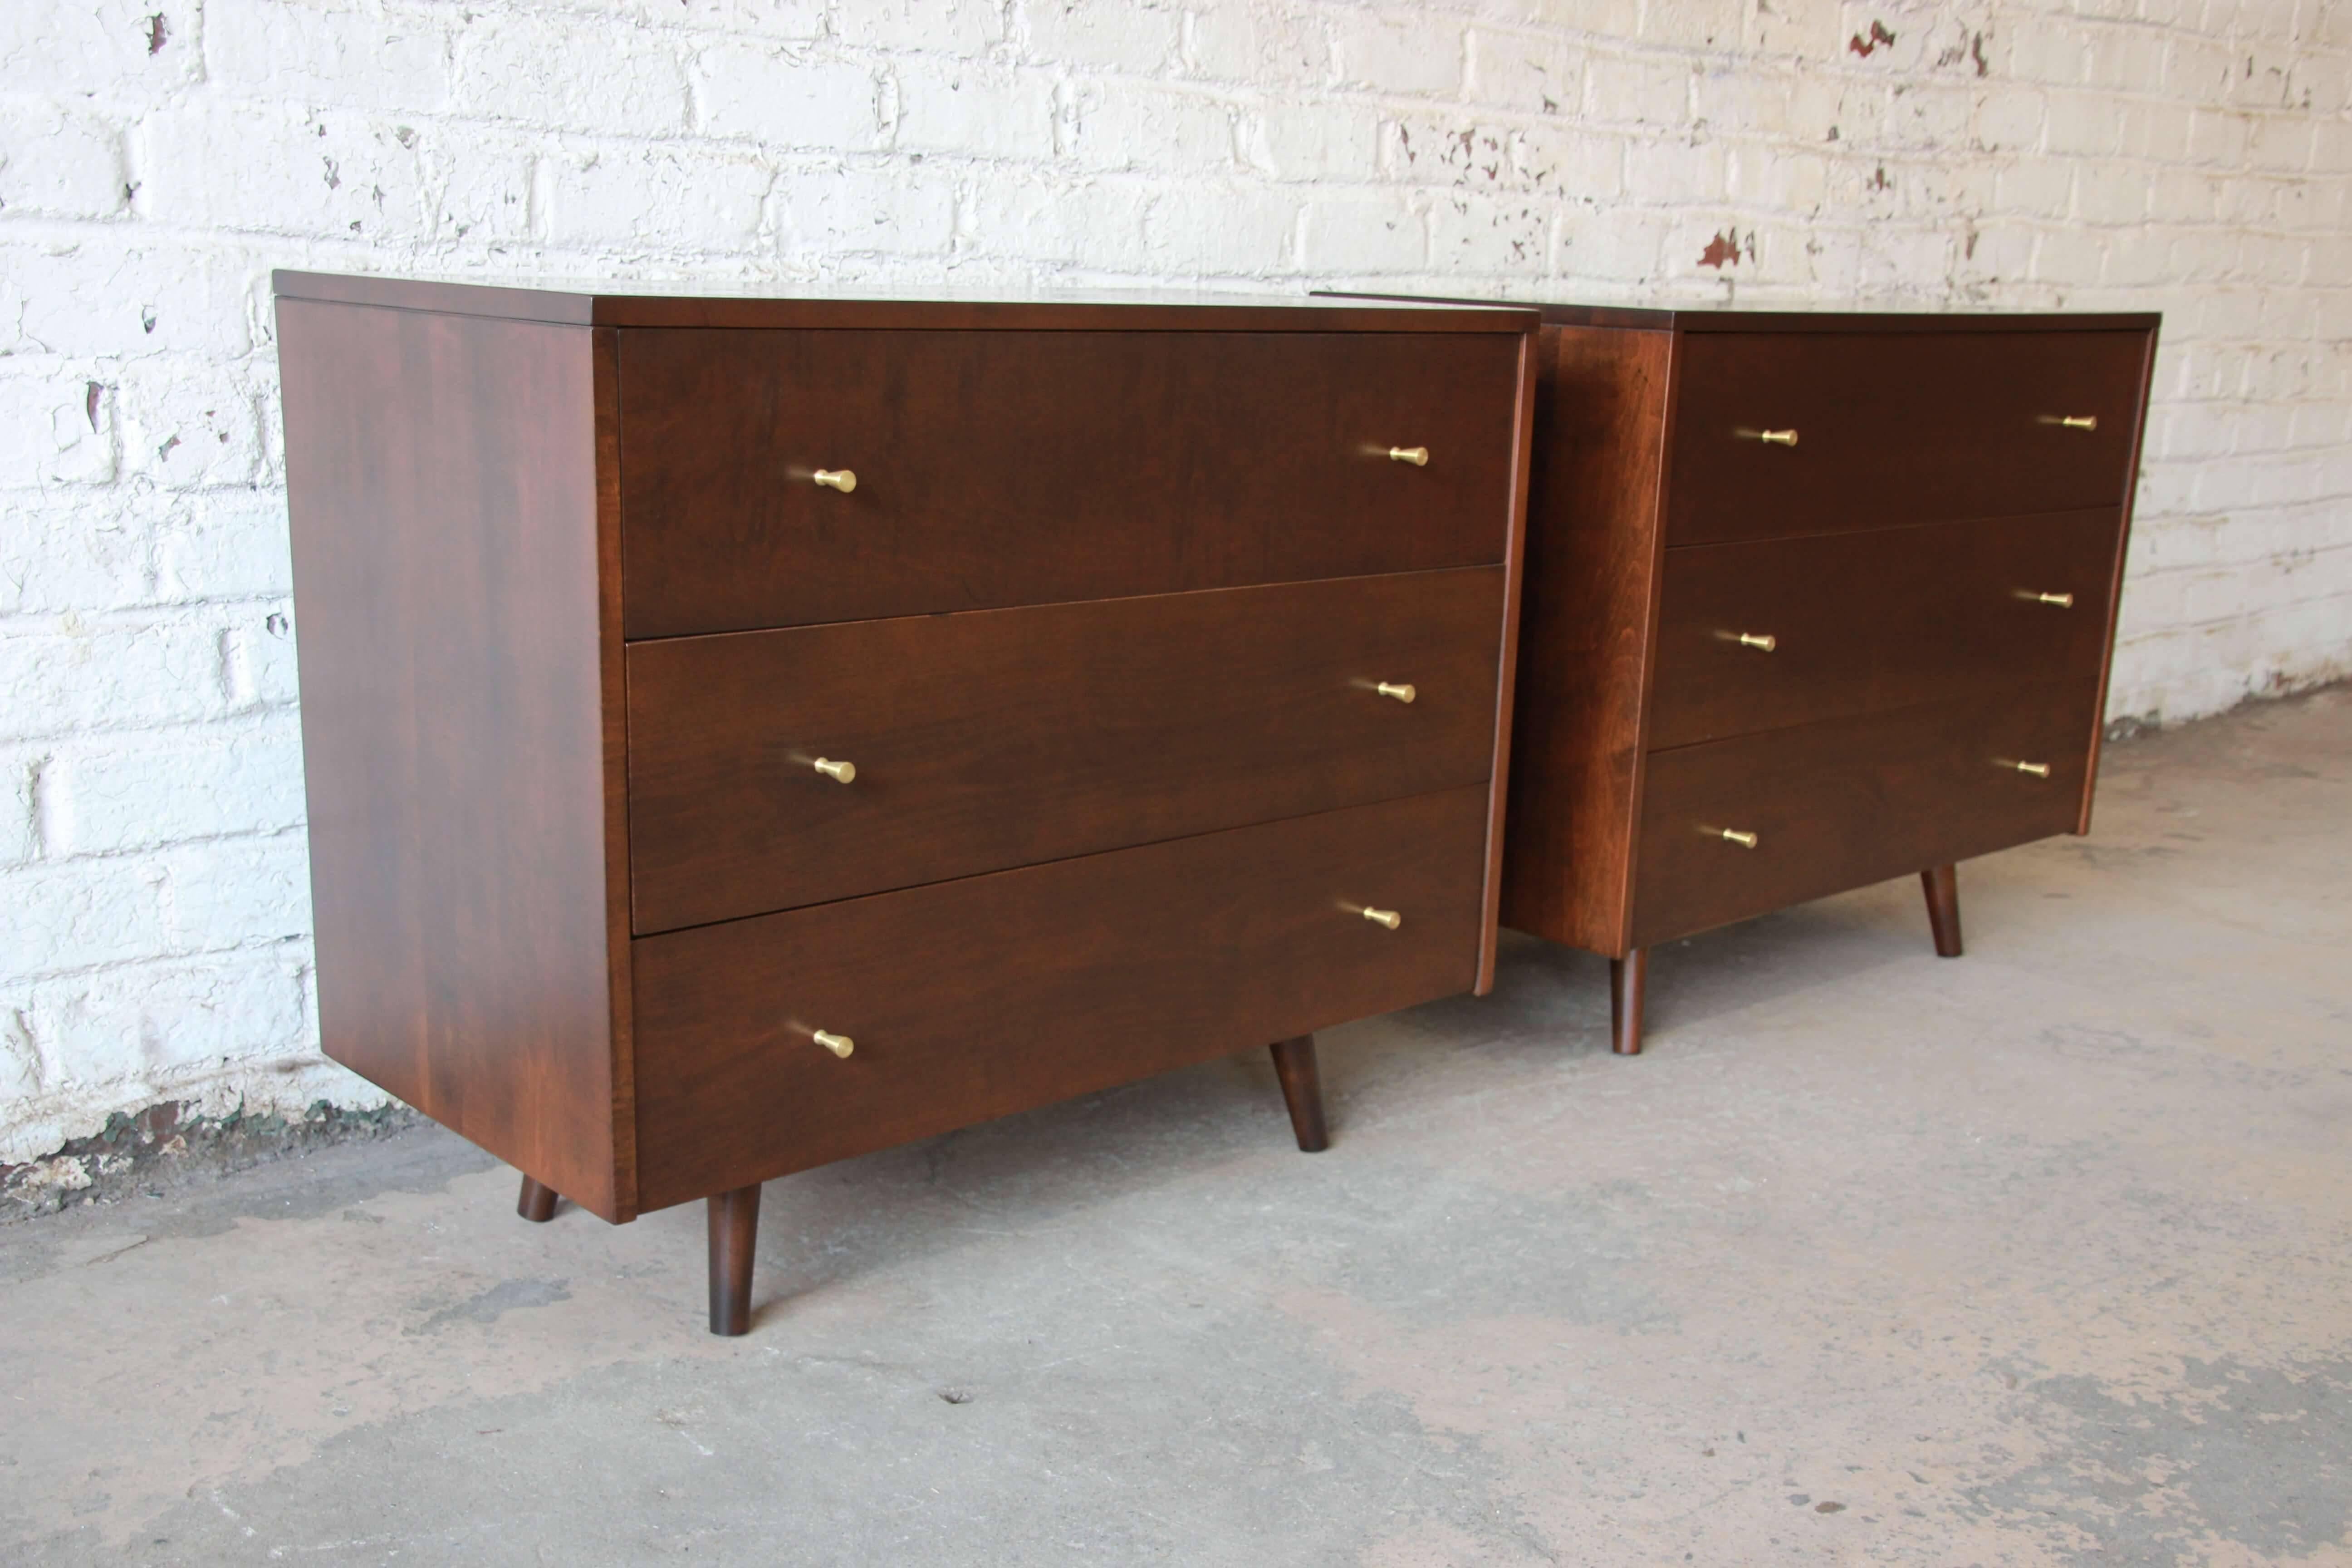 Offering a stunning pair of Paul McCobb three-drawer dressers. The pair have been restored in a medium brown walnut that is accented by brass pulls. Each drawer opens and closes smoothly while providing ample room for storage. Great set for many